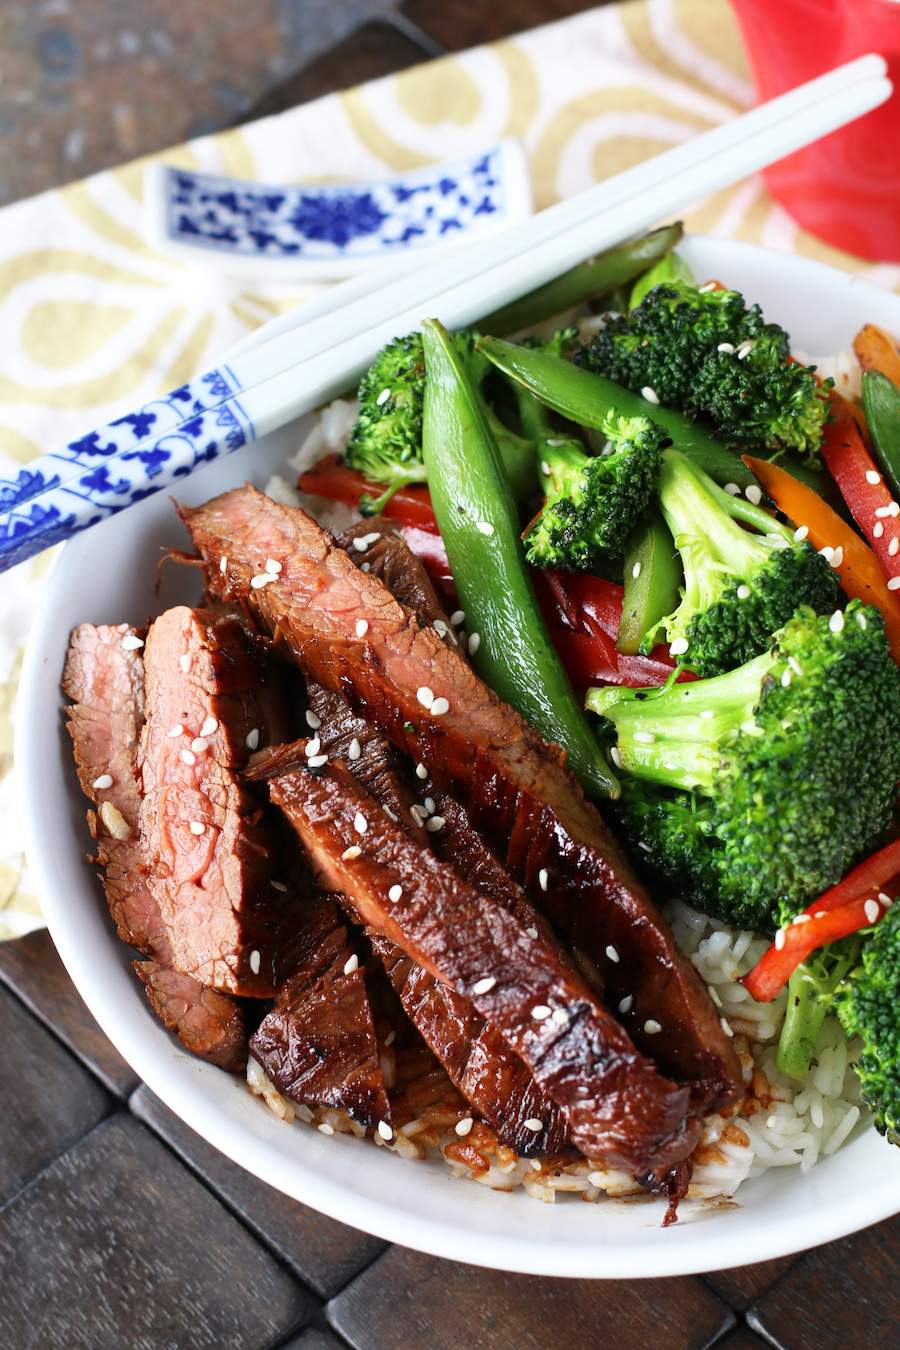 Image of soy marinated flank steak stir-fry with white and blue chopsticks on the bowl and a white and brown napkin in the back.